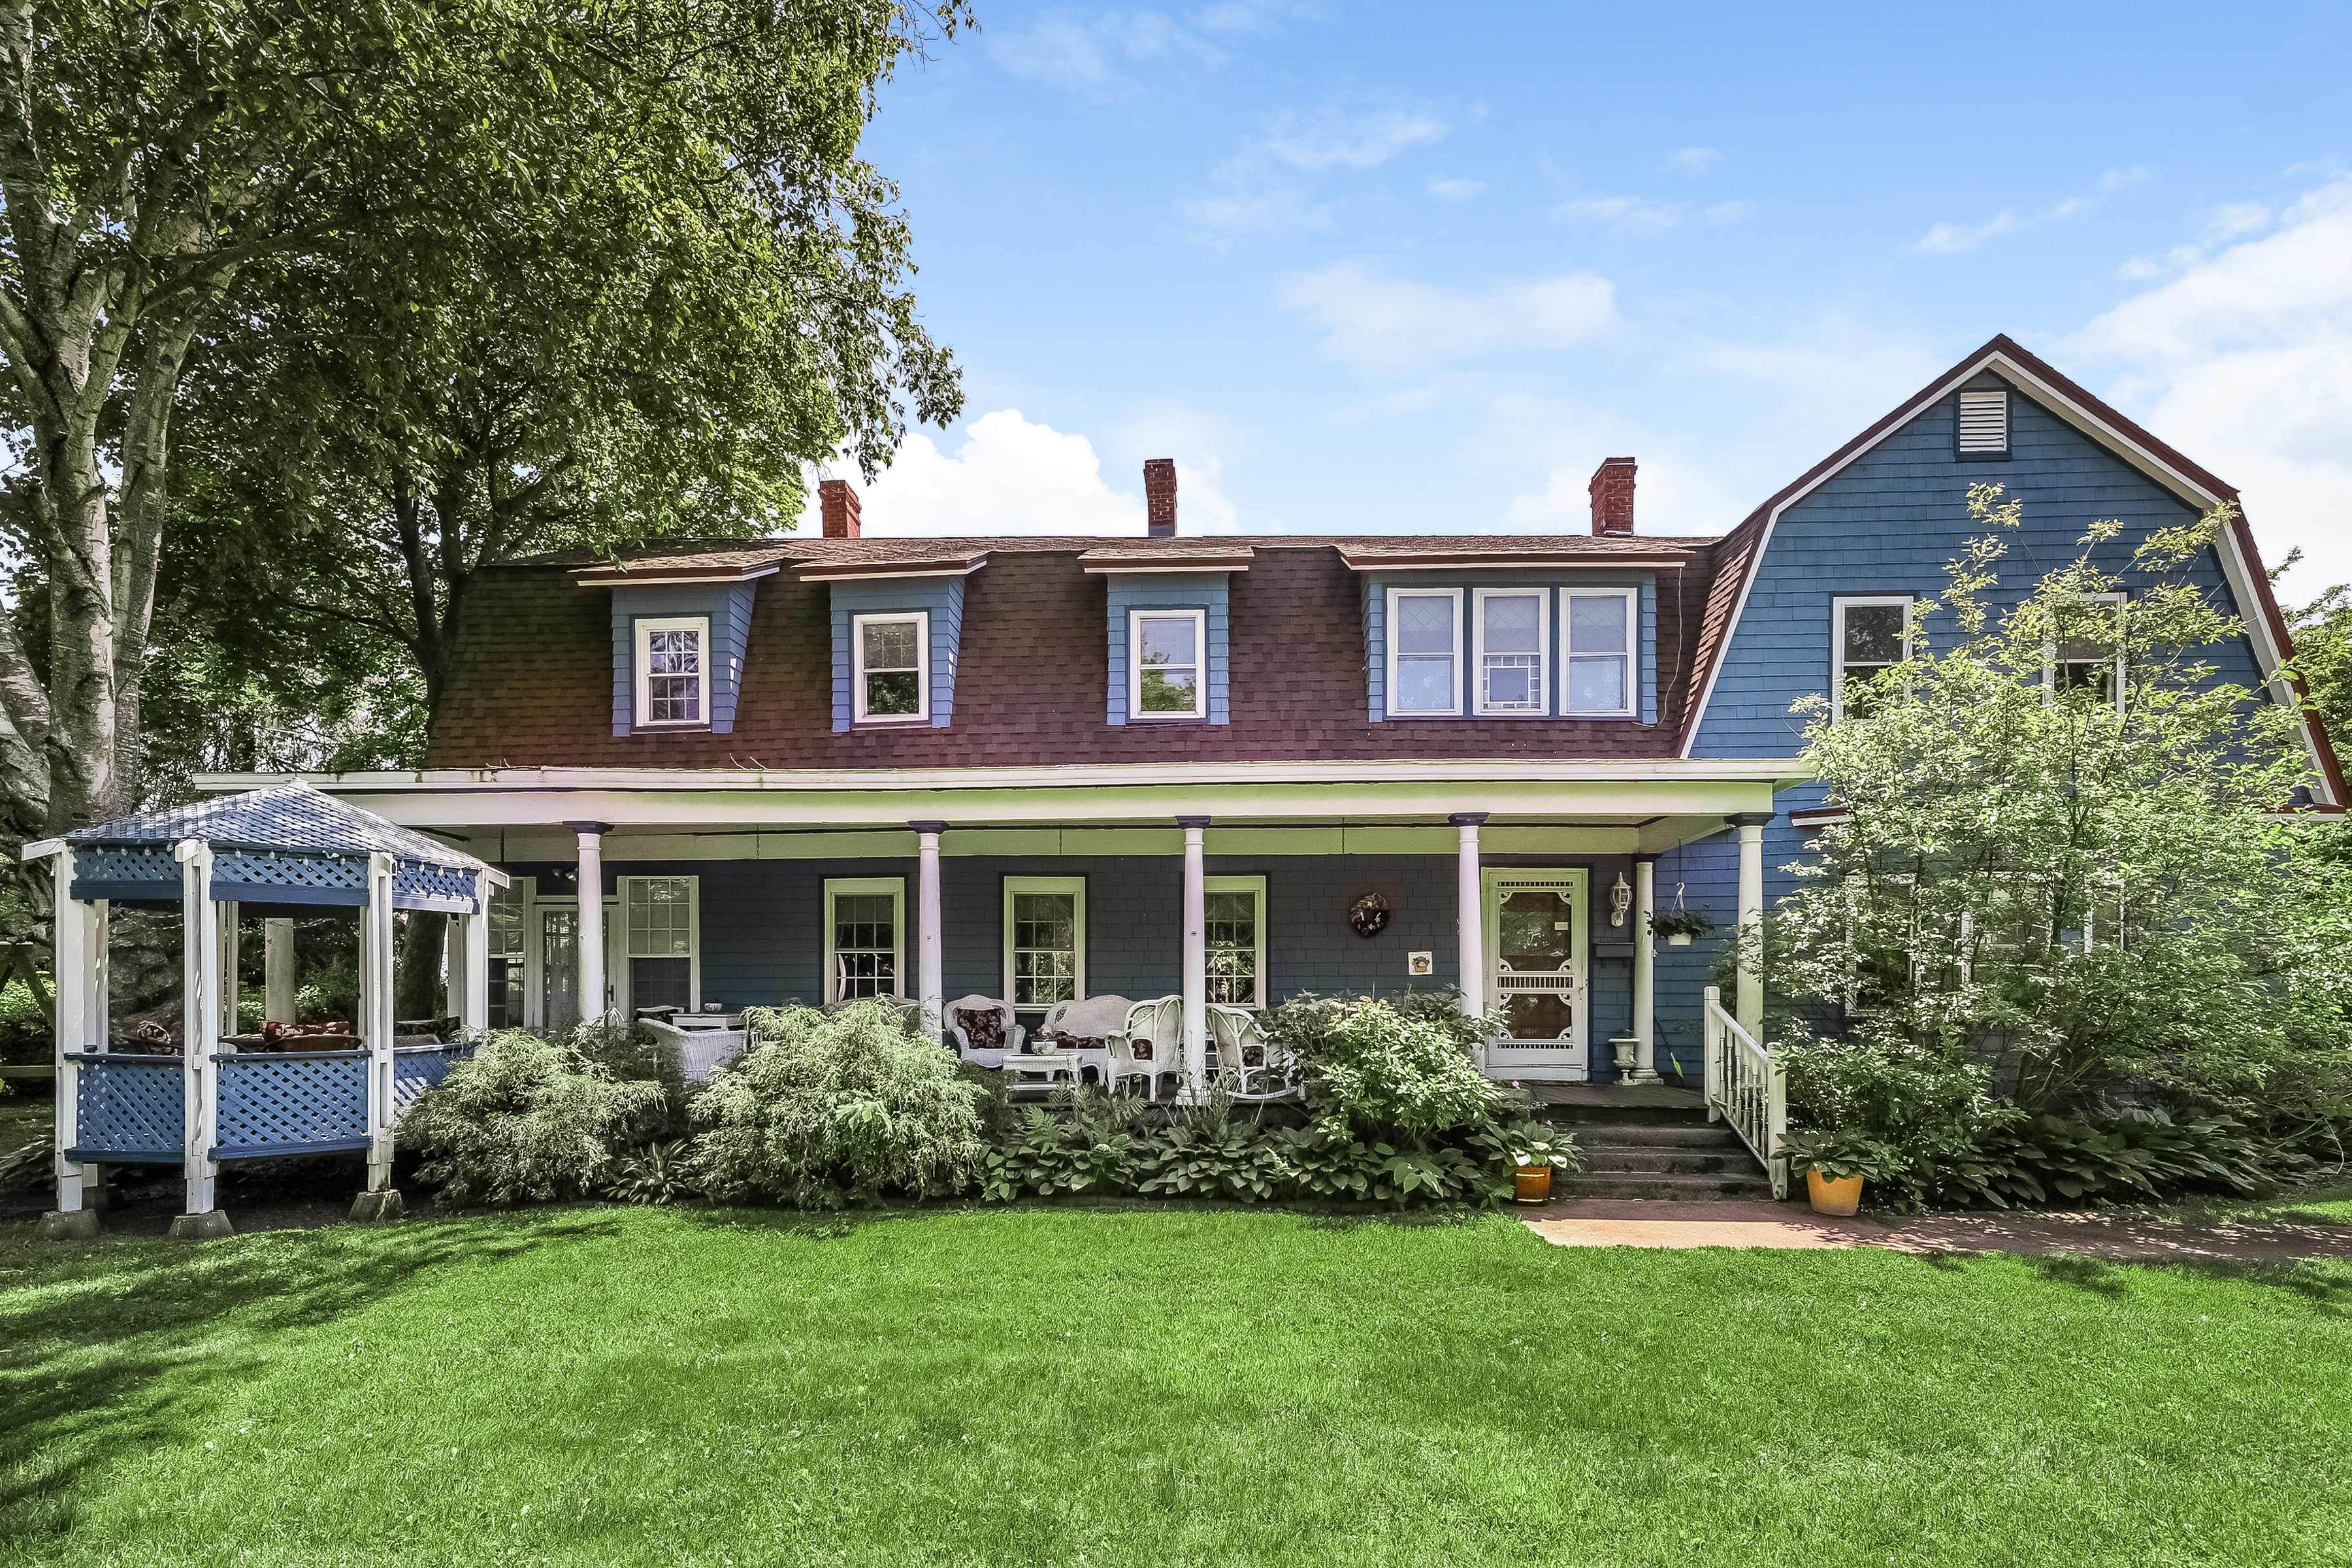 House of the Week: Narragansett Colonial brimming with period details